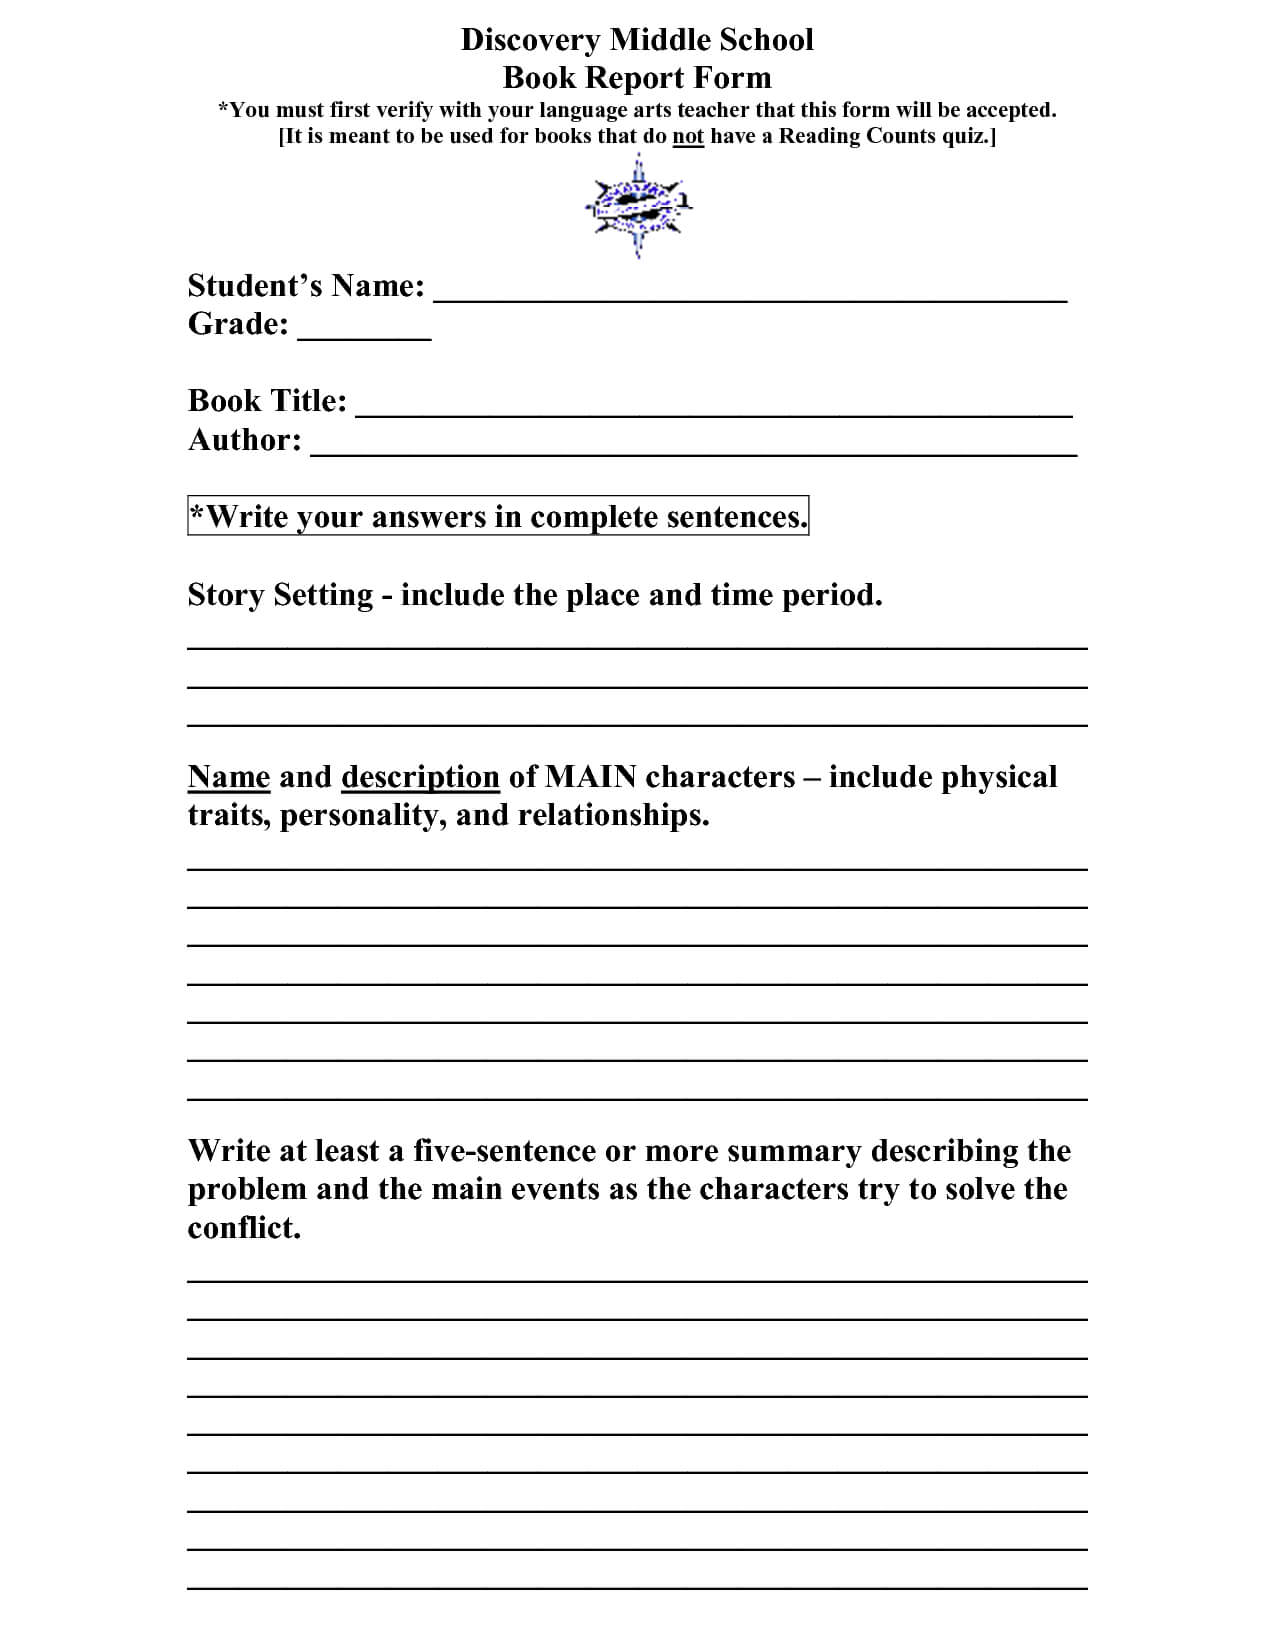 Scope Of Work Template | Teaching & Learning | Middle School Intended For Middle School Book Report Template